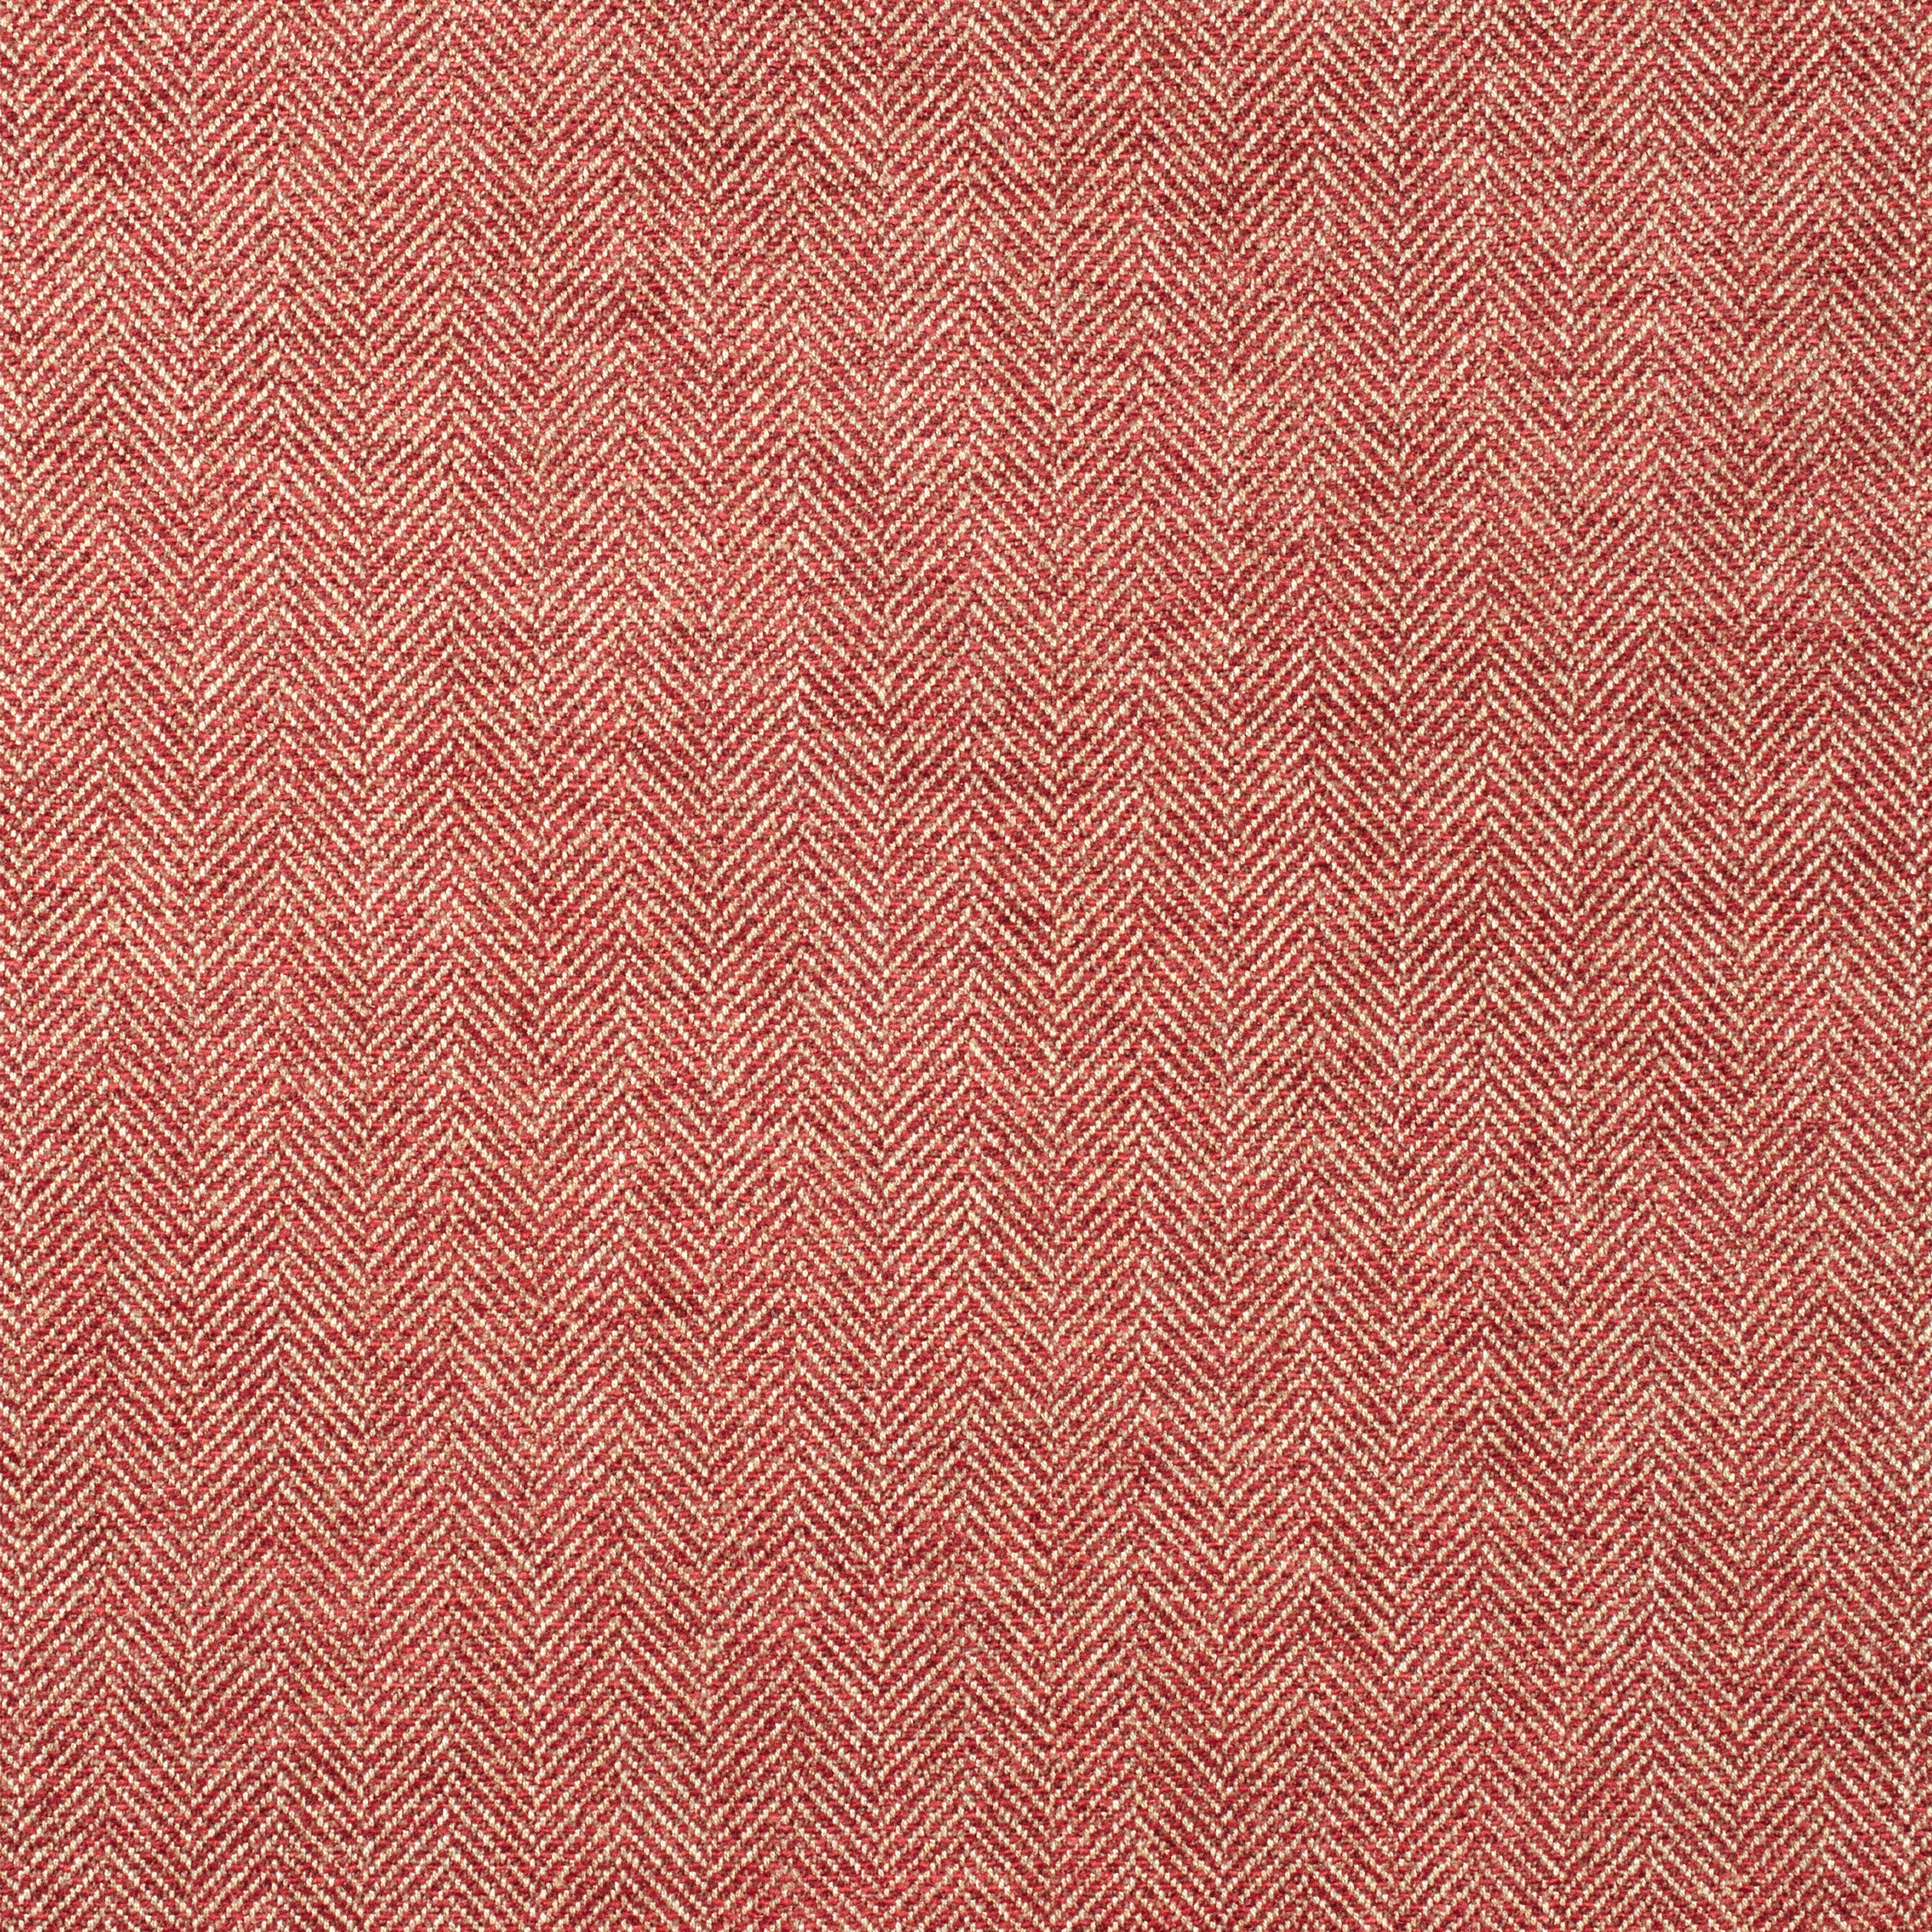 Hadrian Herringbone fabric in cardinal color - pattern number W80714 - by Thibaut in the Woven Resource 11: Rialto collection